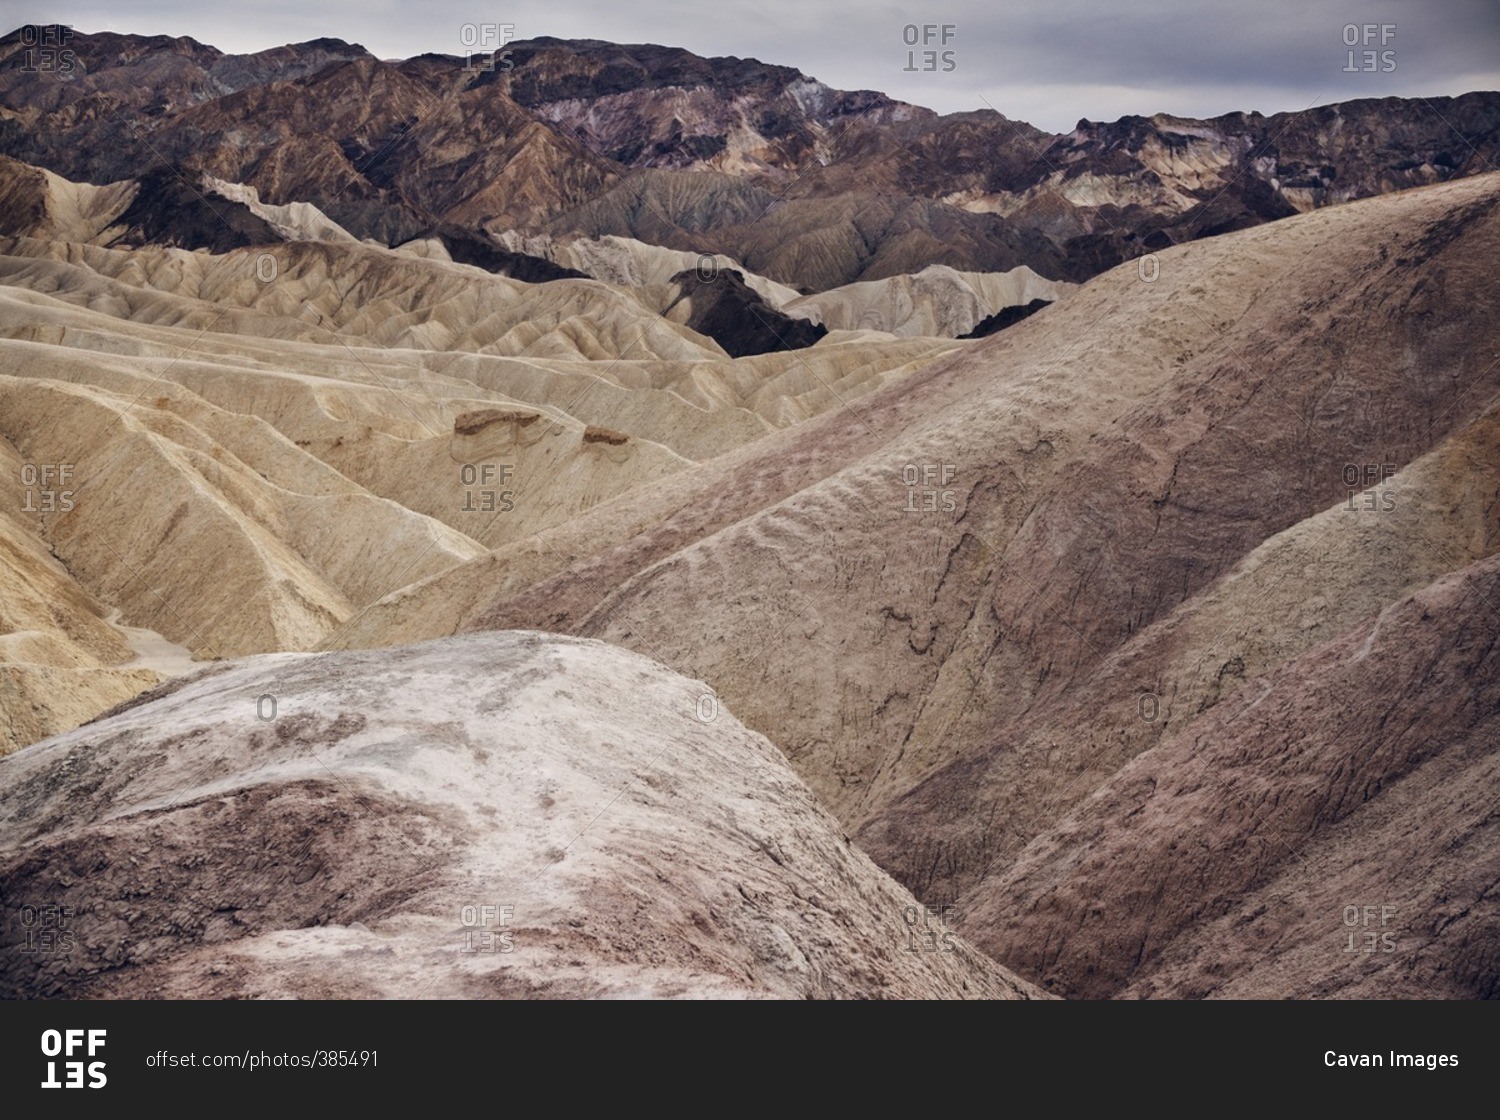 Scenic view of dramatic landscape at Death Valley National Park